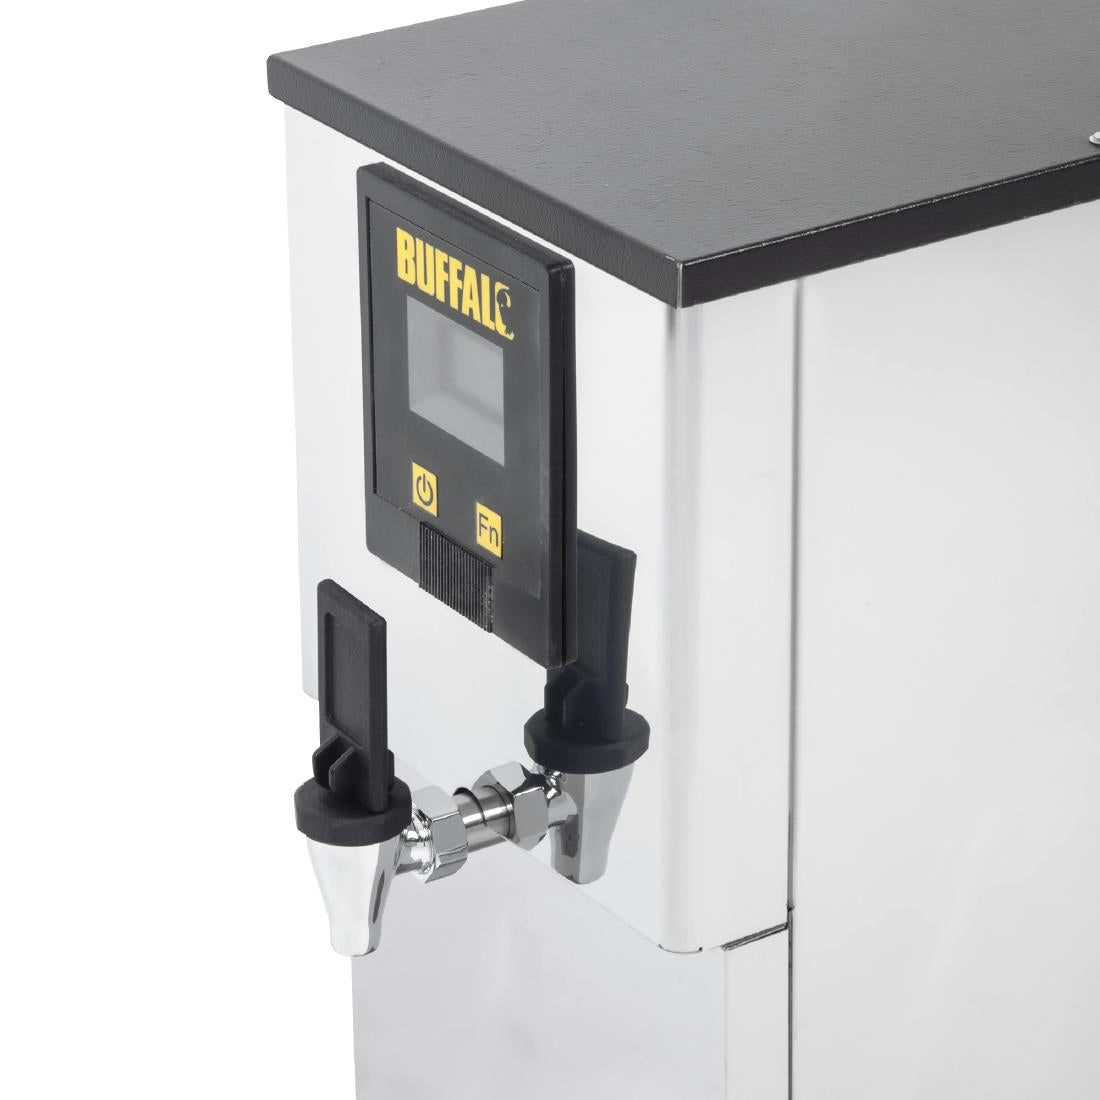 Buffalo 10 Ltr Auto Fill Water Boiler Machine Only JD Catering Equipment Solutions Ltd